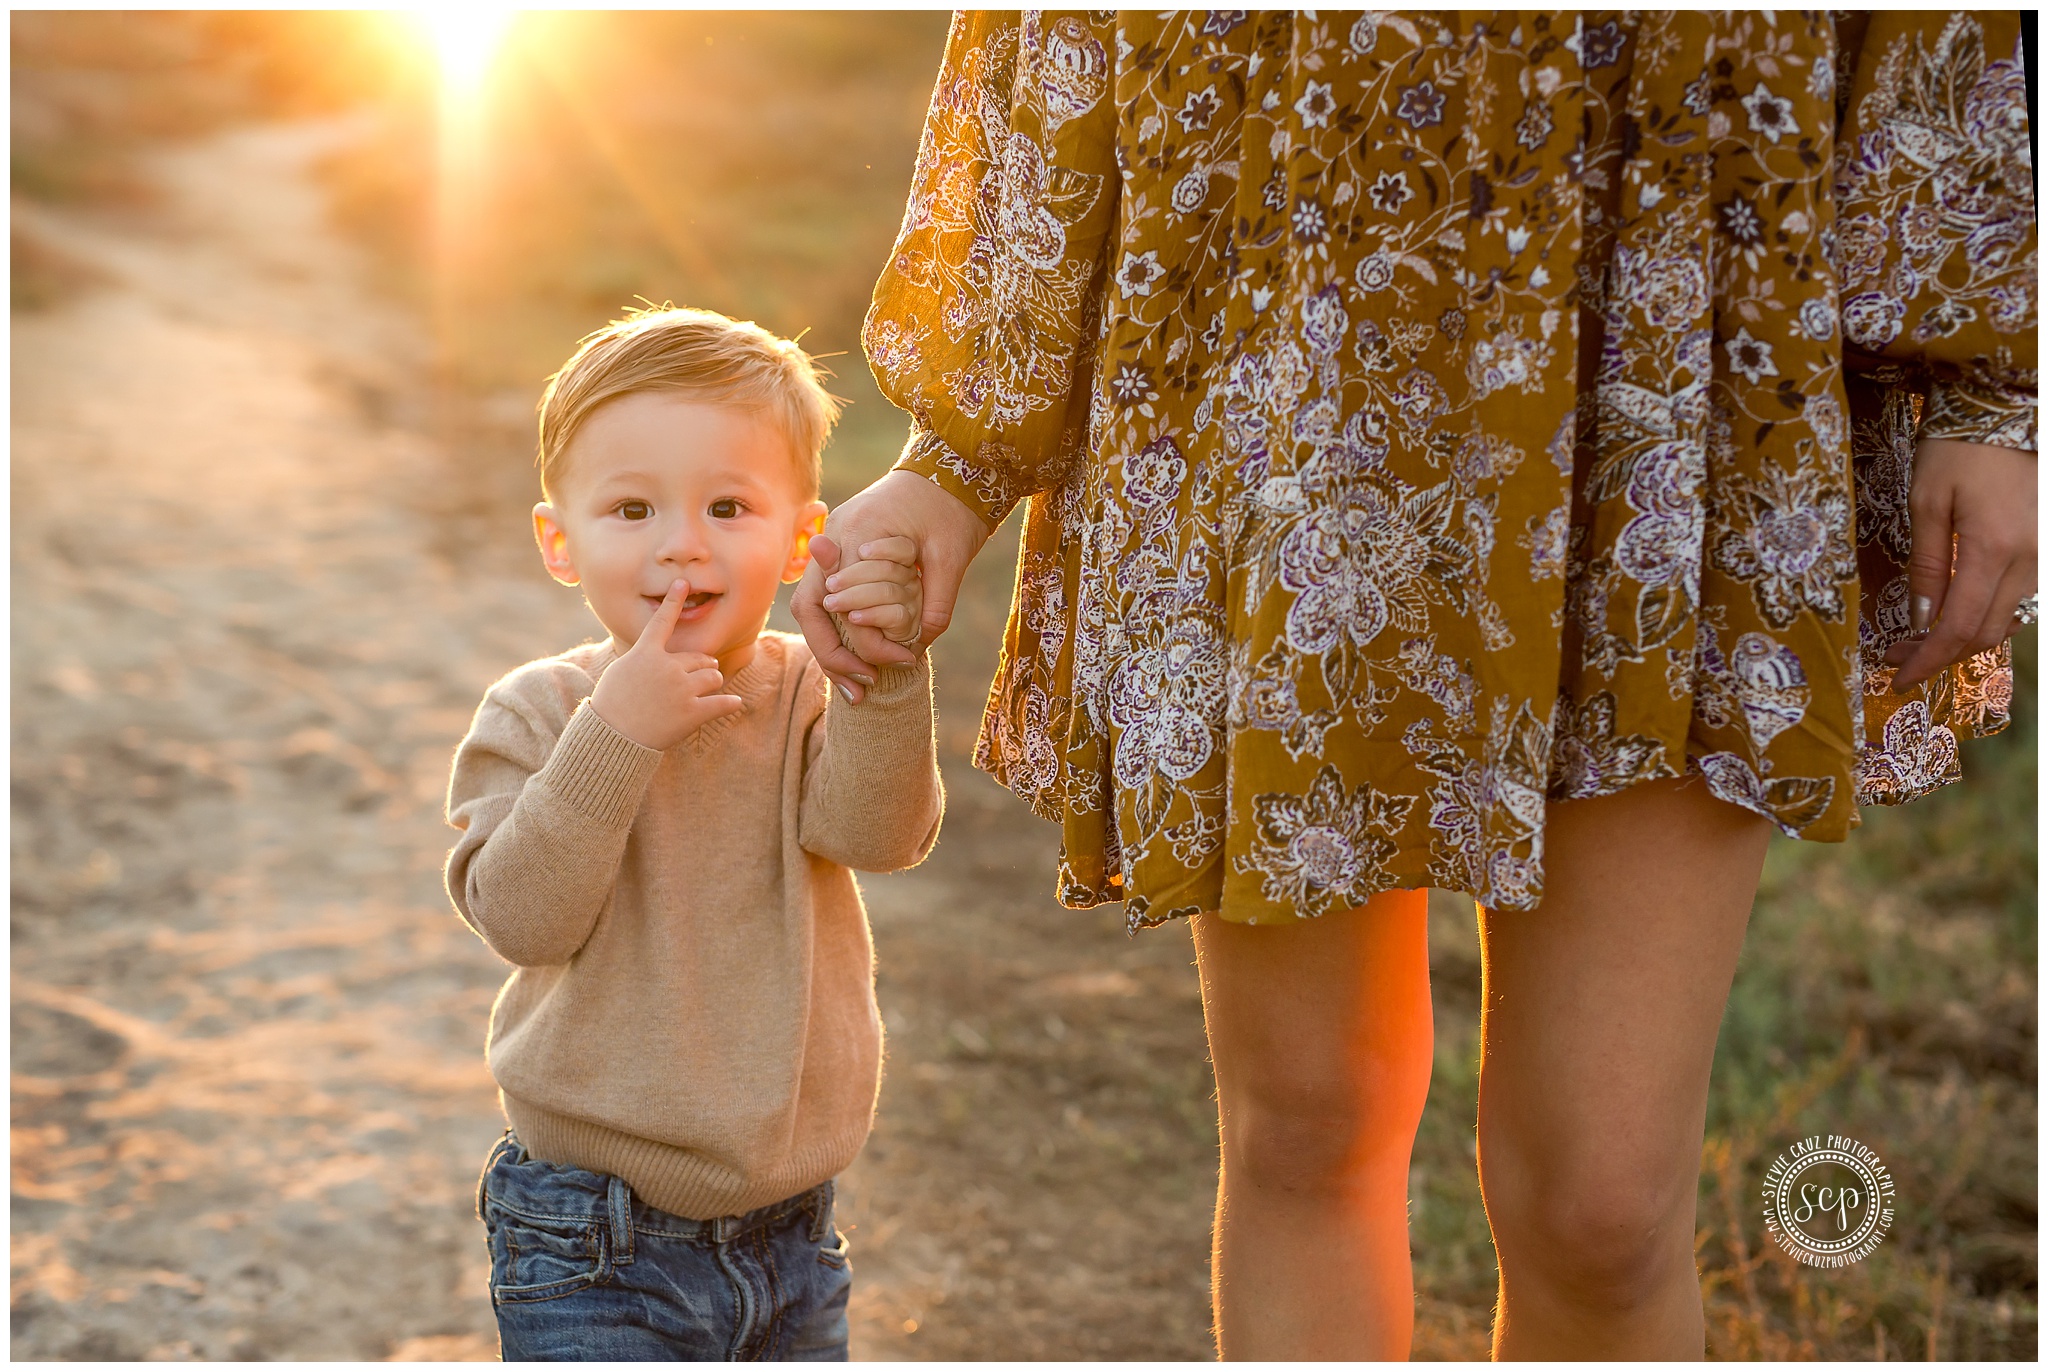 Taking family photos is so important. Love how the sun is beaming behind this photo of toddler and his mom.